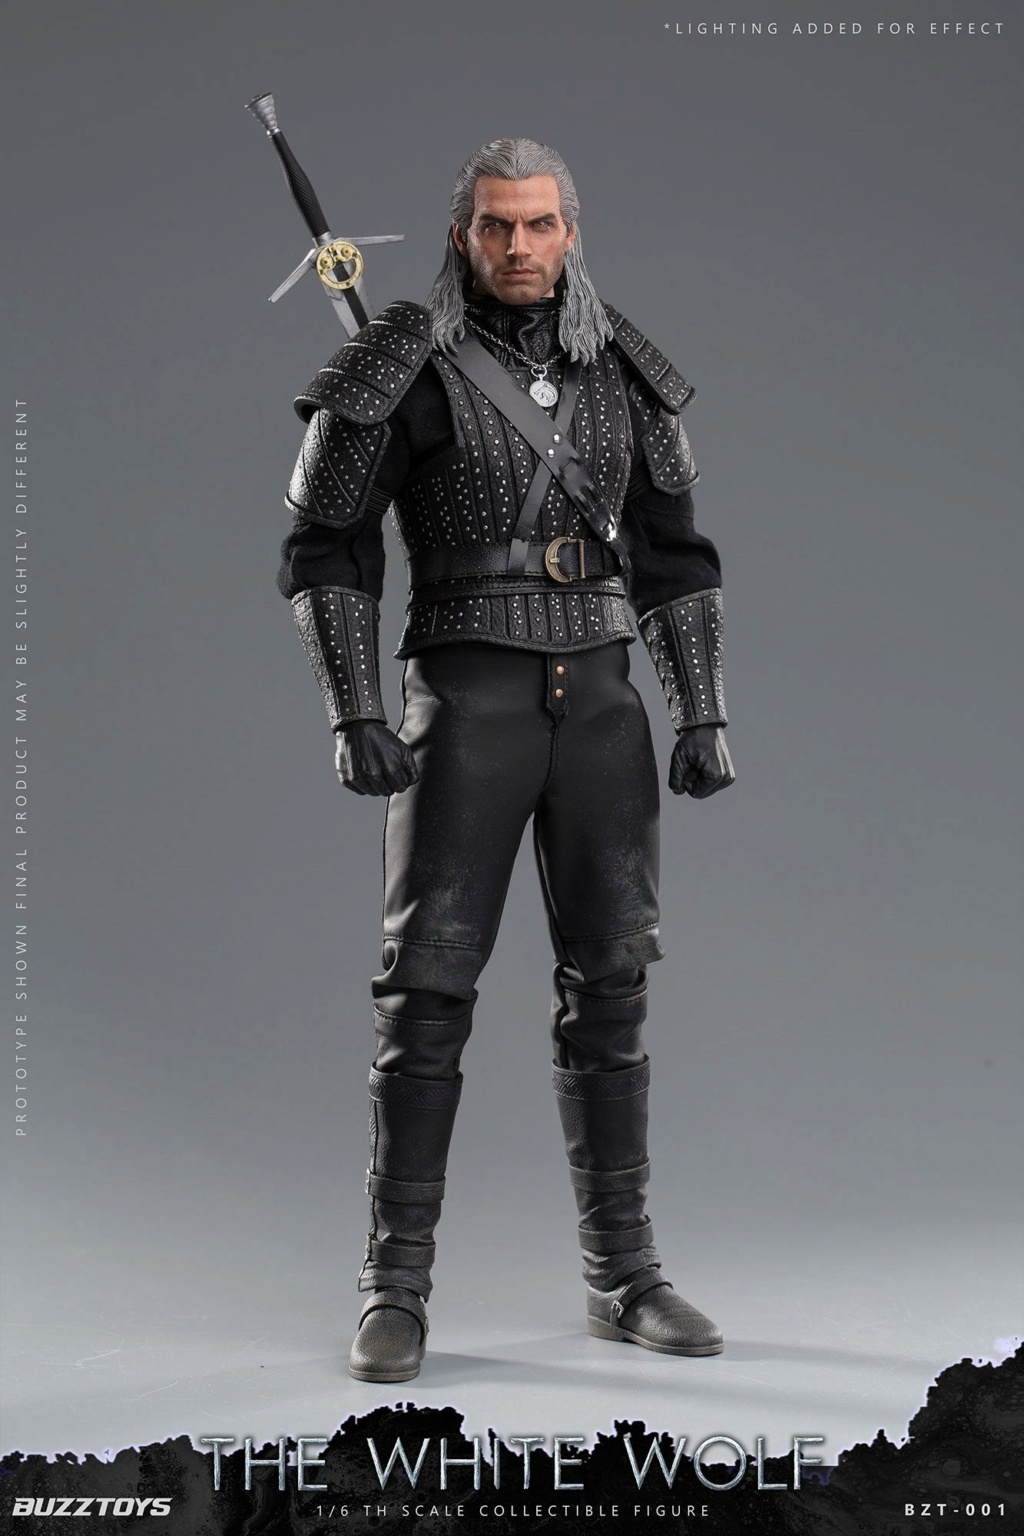 fantasy - NEW PRODUCT: BUZZTOYS: BZT001 1/6 Scale The White Wolf 20156